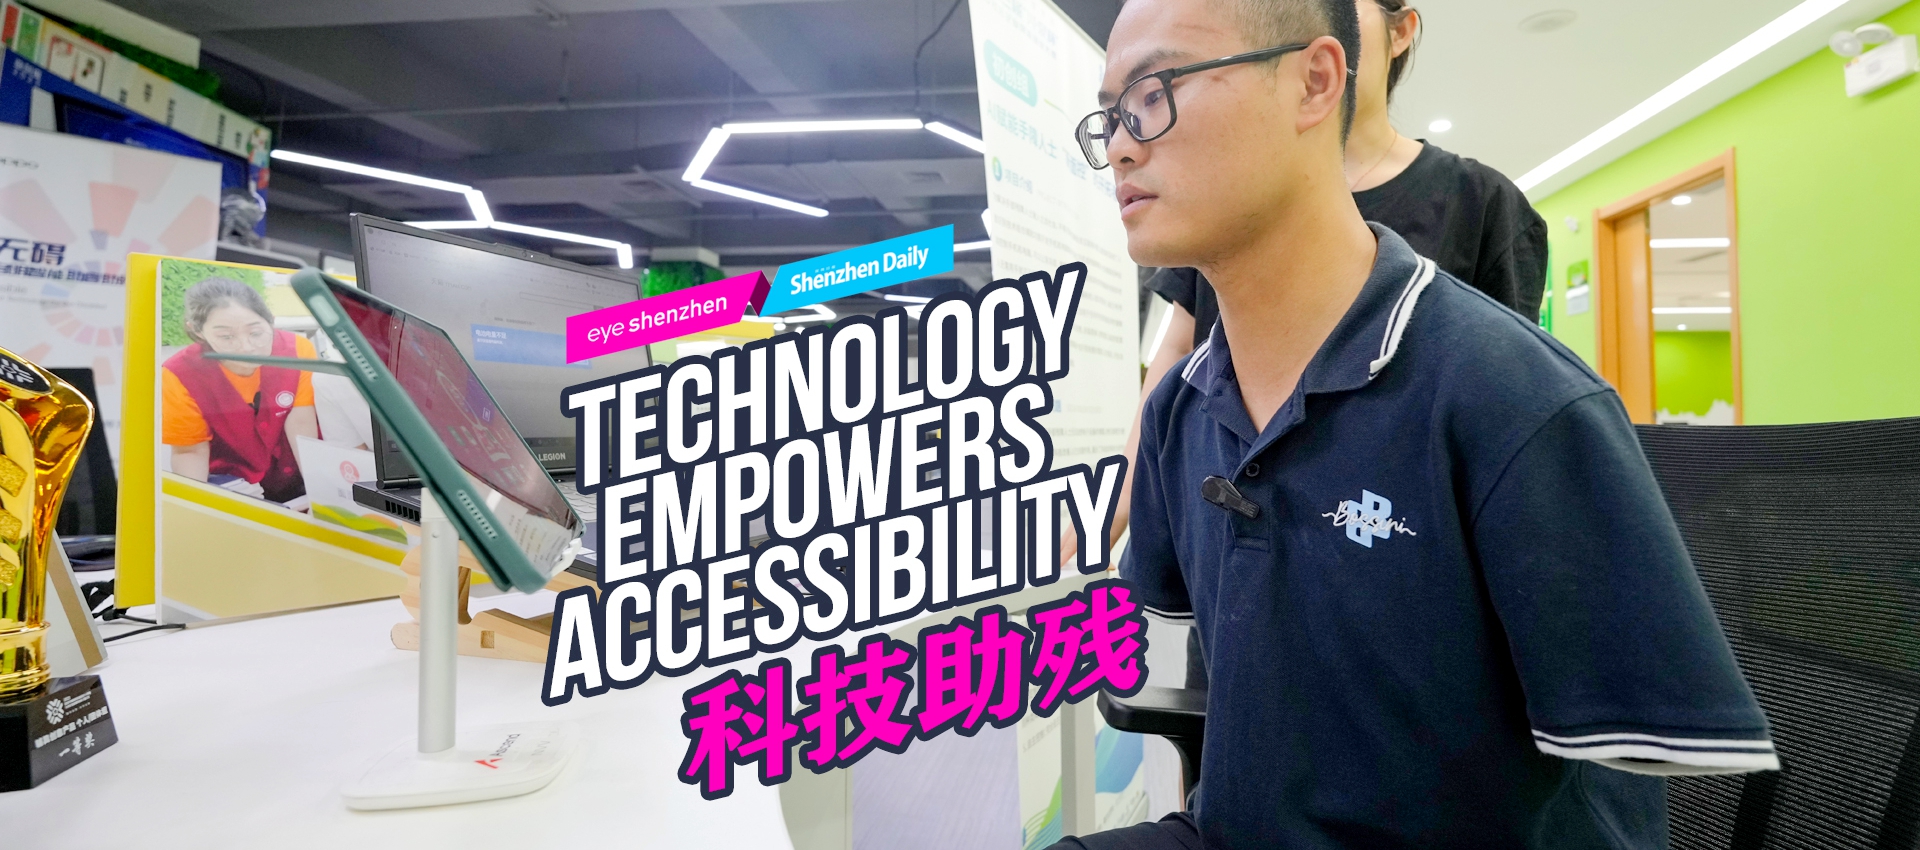 Technology empowers accessibility